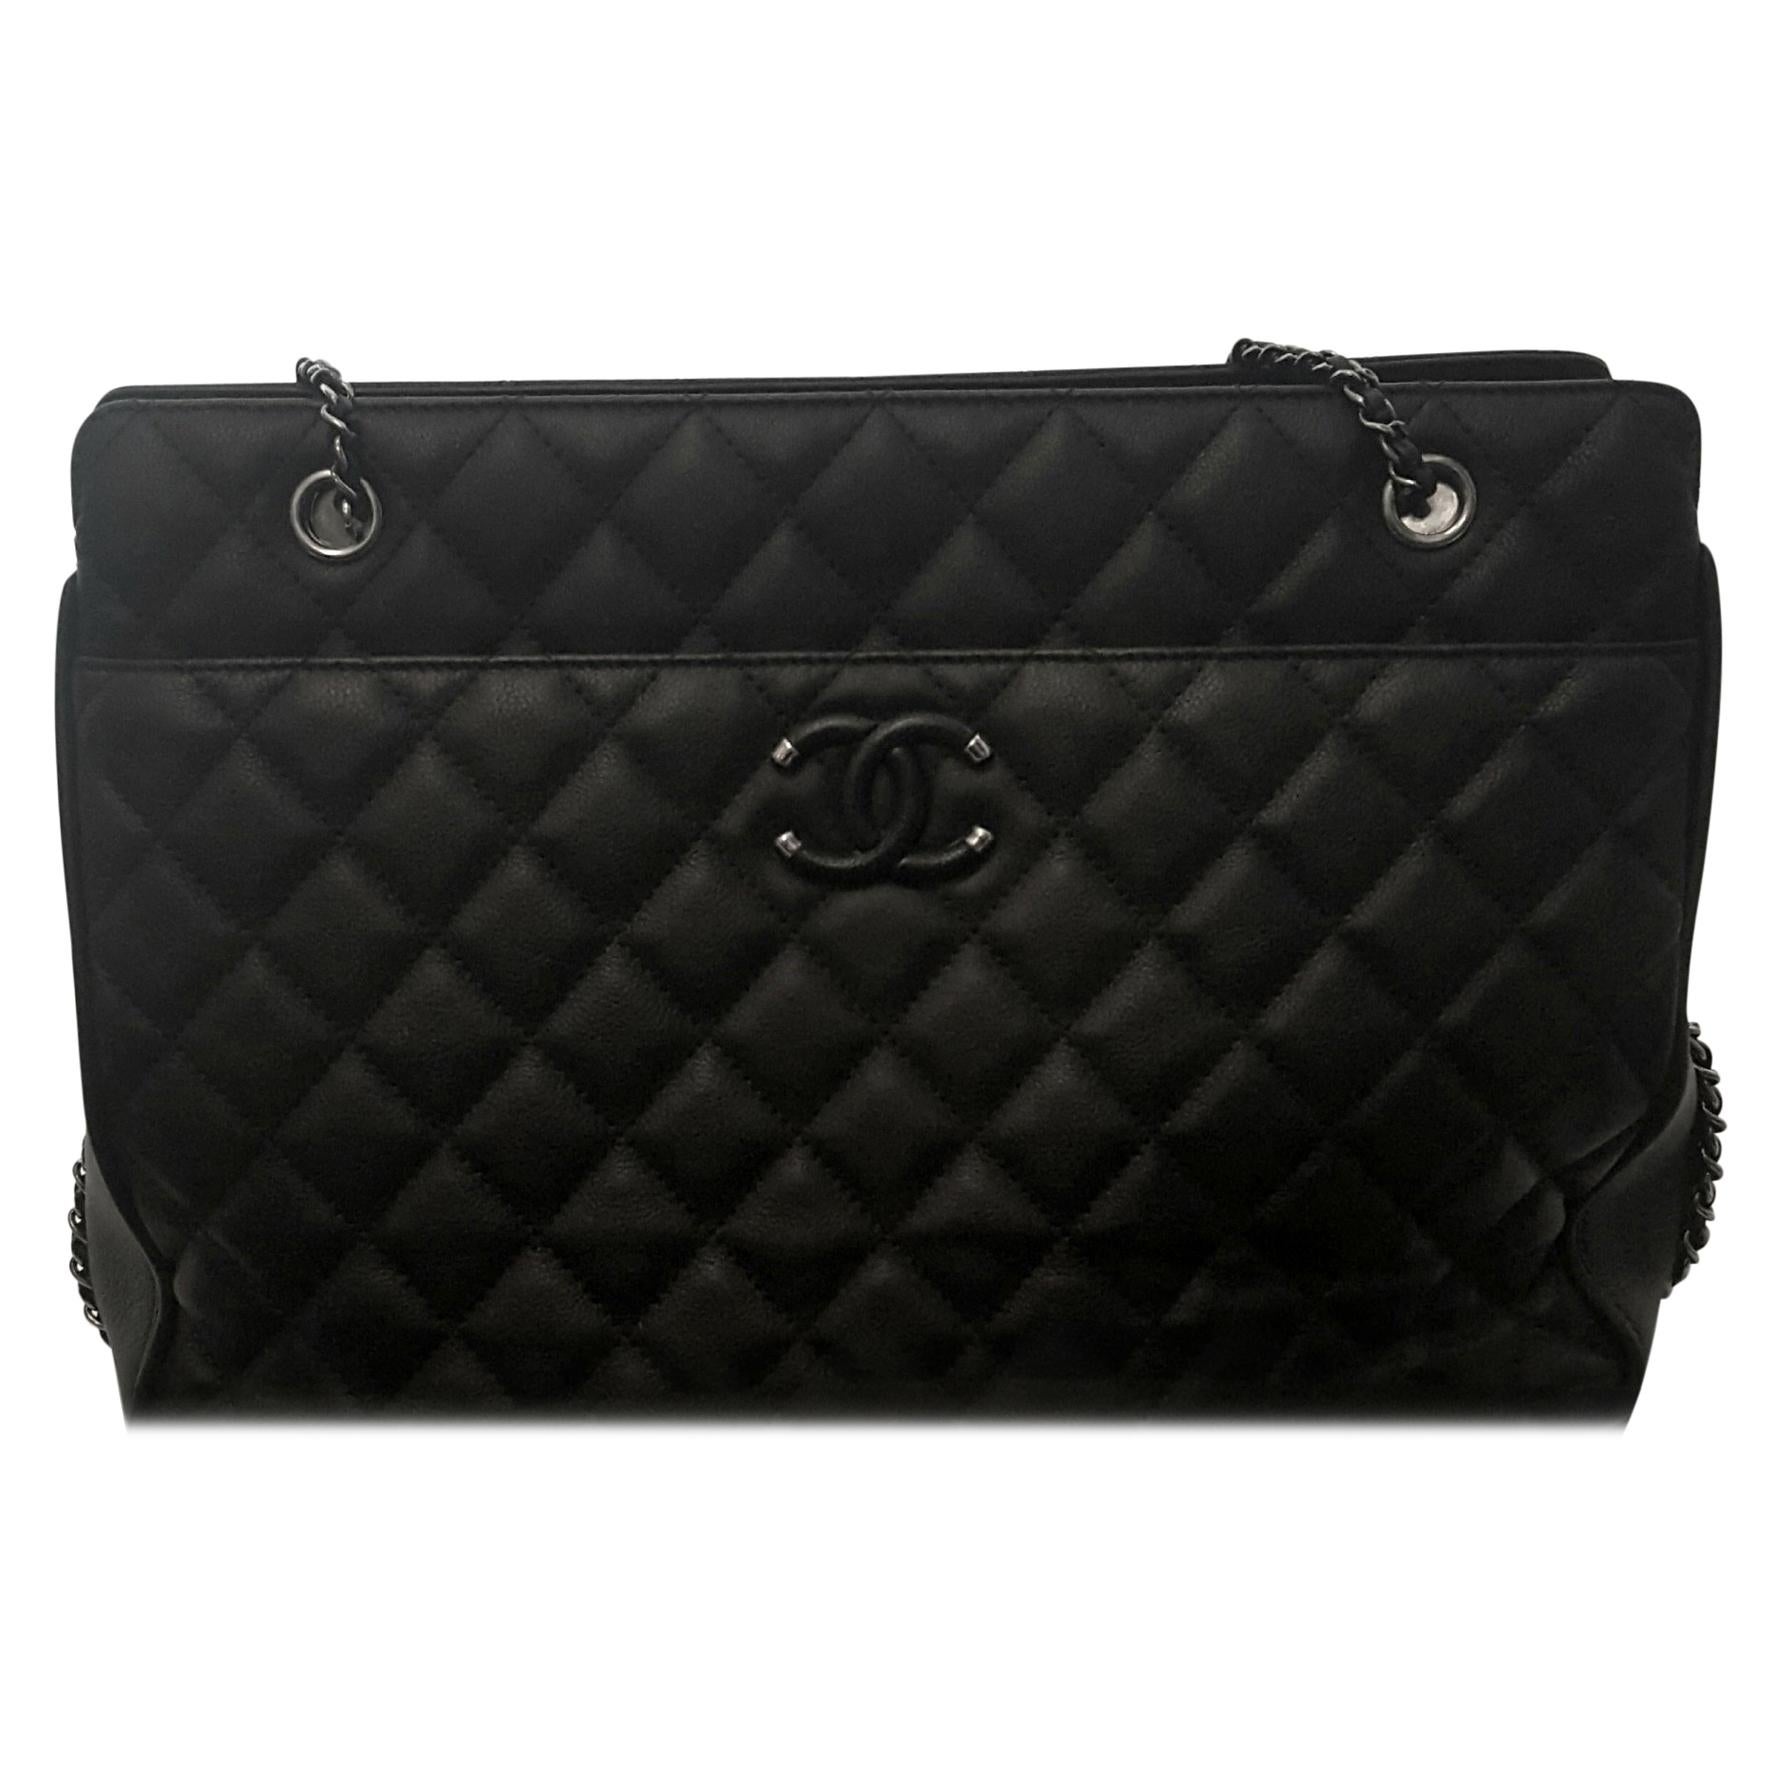 Chanel Diamond Quilt Leather W/ Ruthenium Chain Link & Leather Shoulder Pad Tote